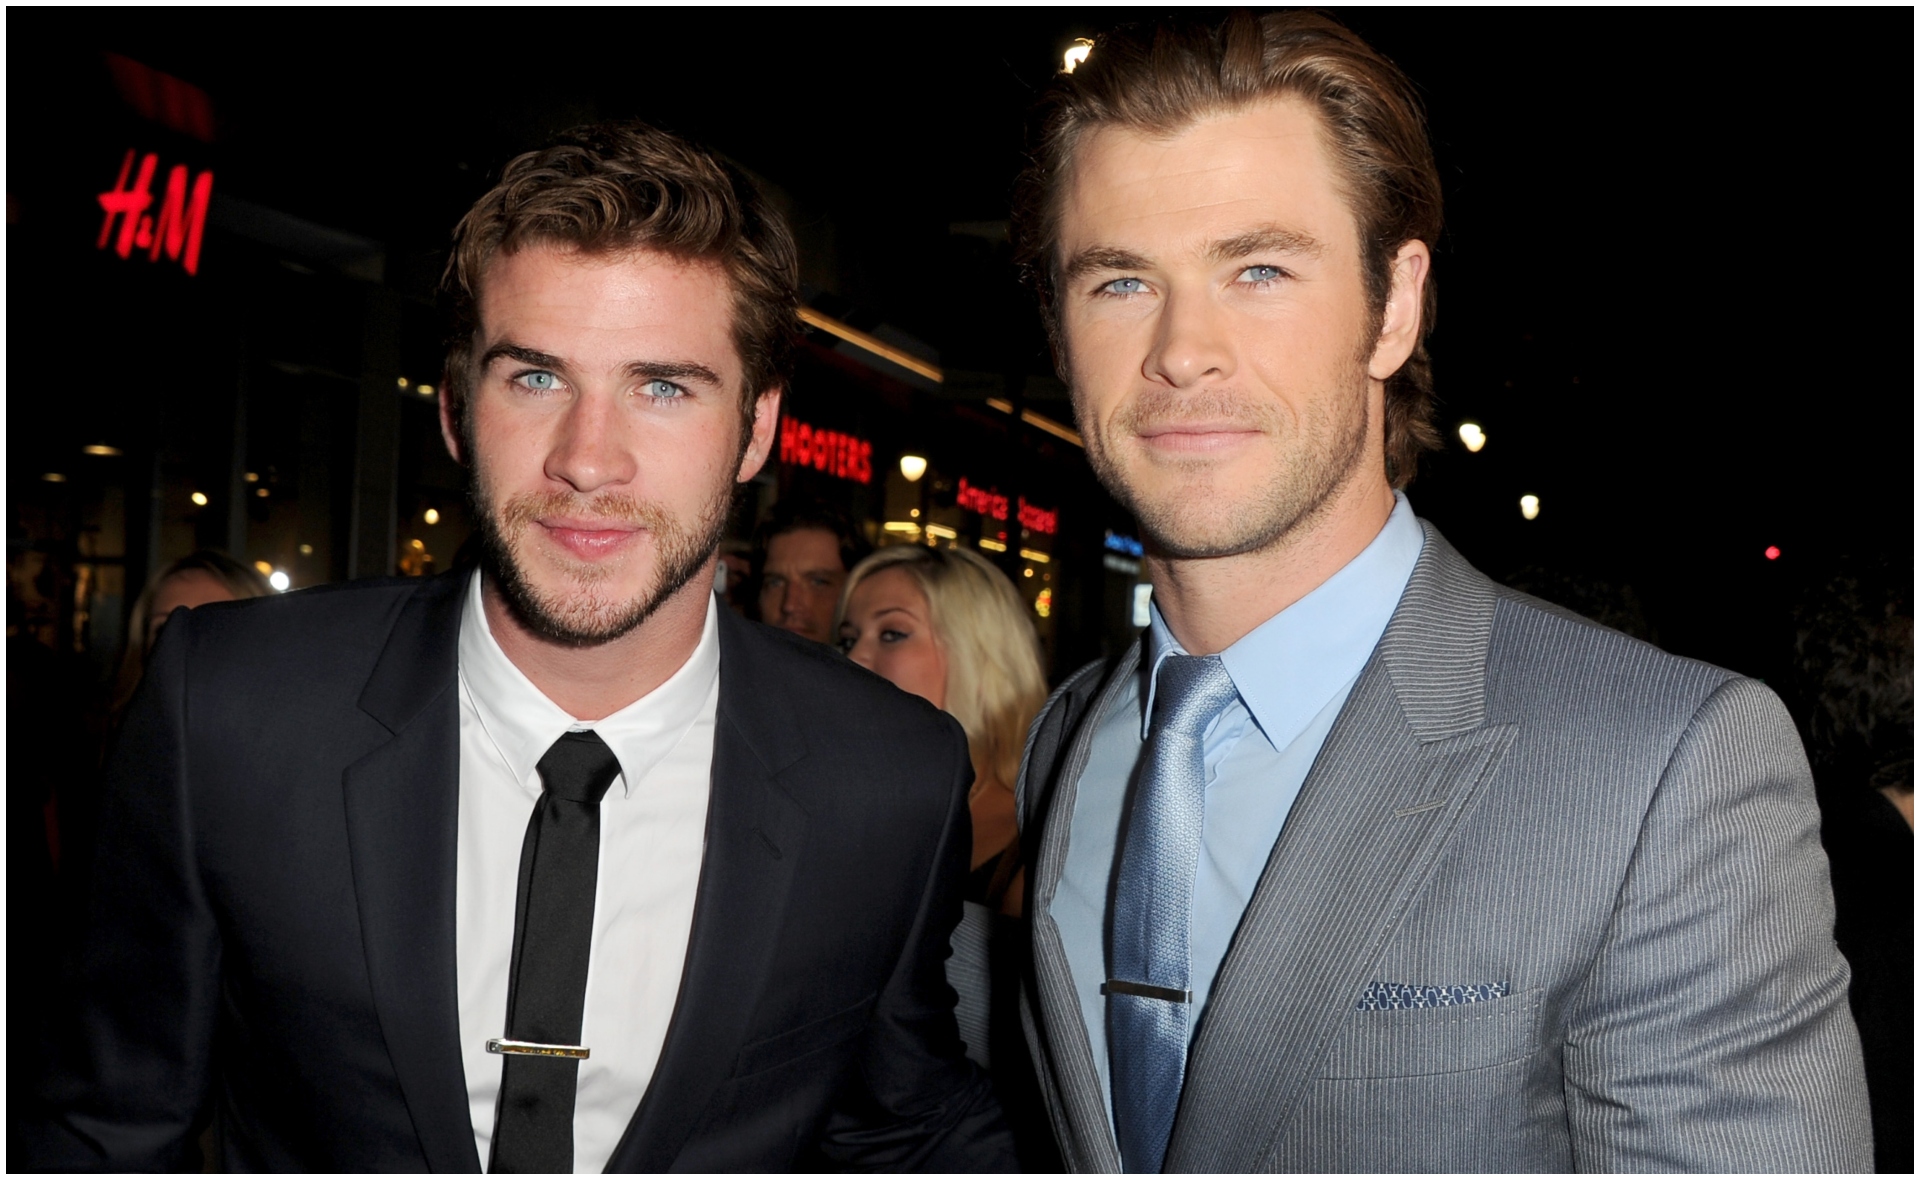 Friendly rivalry between the Hemsworth brothers takes a turn as Chris and Liam grow apart